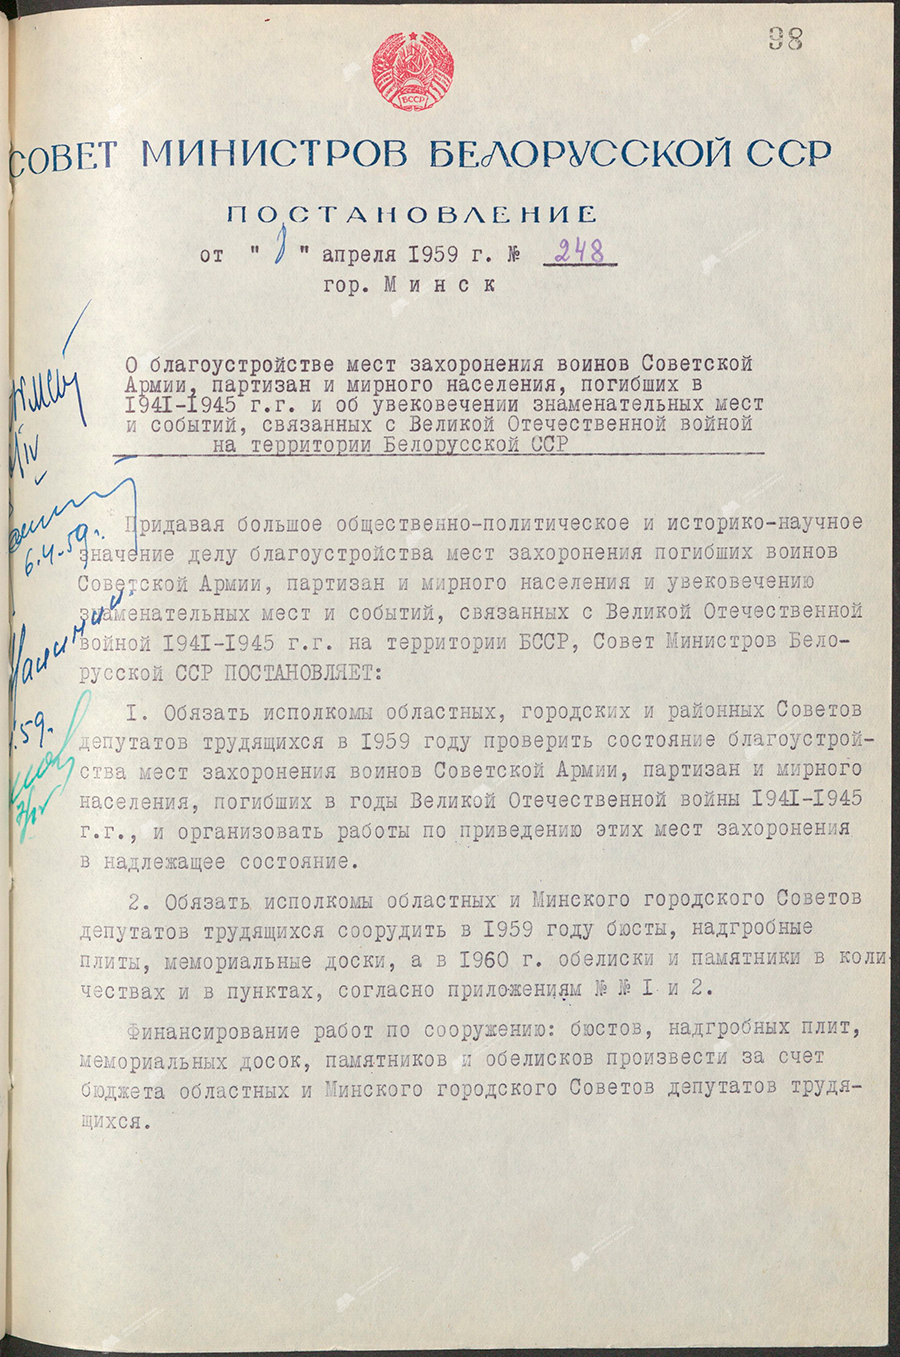 Resolution No. 248 of the Council of Ministers of the BSSR «On the improvement of burial places of soldiers of the Soviet Army, partisans and civilians who died in 1941 - 1945.» and on the perpetuation of significant places and events associated with the Great Patriotic War on the territory of the Belarusian SSR»-стр. 0